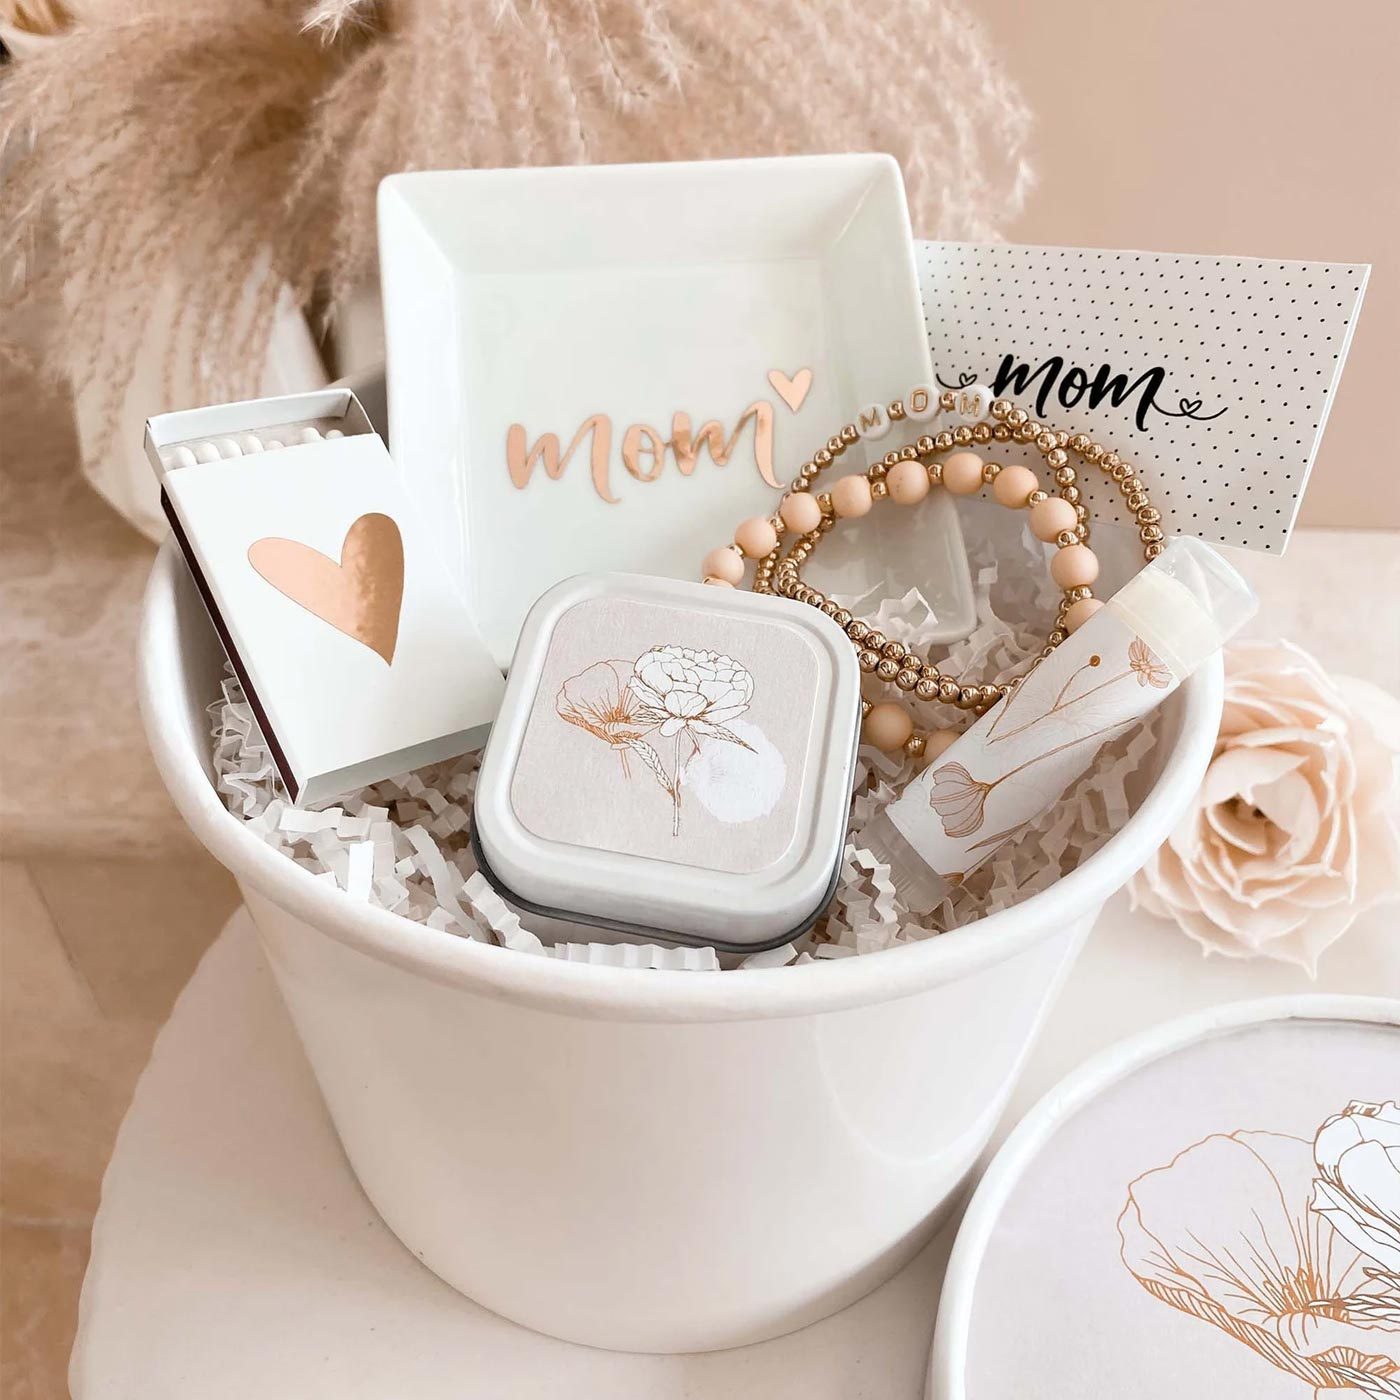 BOGATCHI Happy Mother's Day Theme Gift Box, Best MOM Ever Dark Chocolate Box,  Special Mothers Day Gift from Son for Mother, 12 pcs + Free - Mothers Day  Greeting Card +Red Rose :